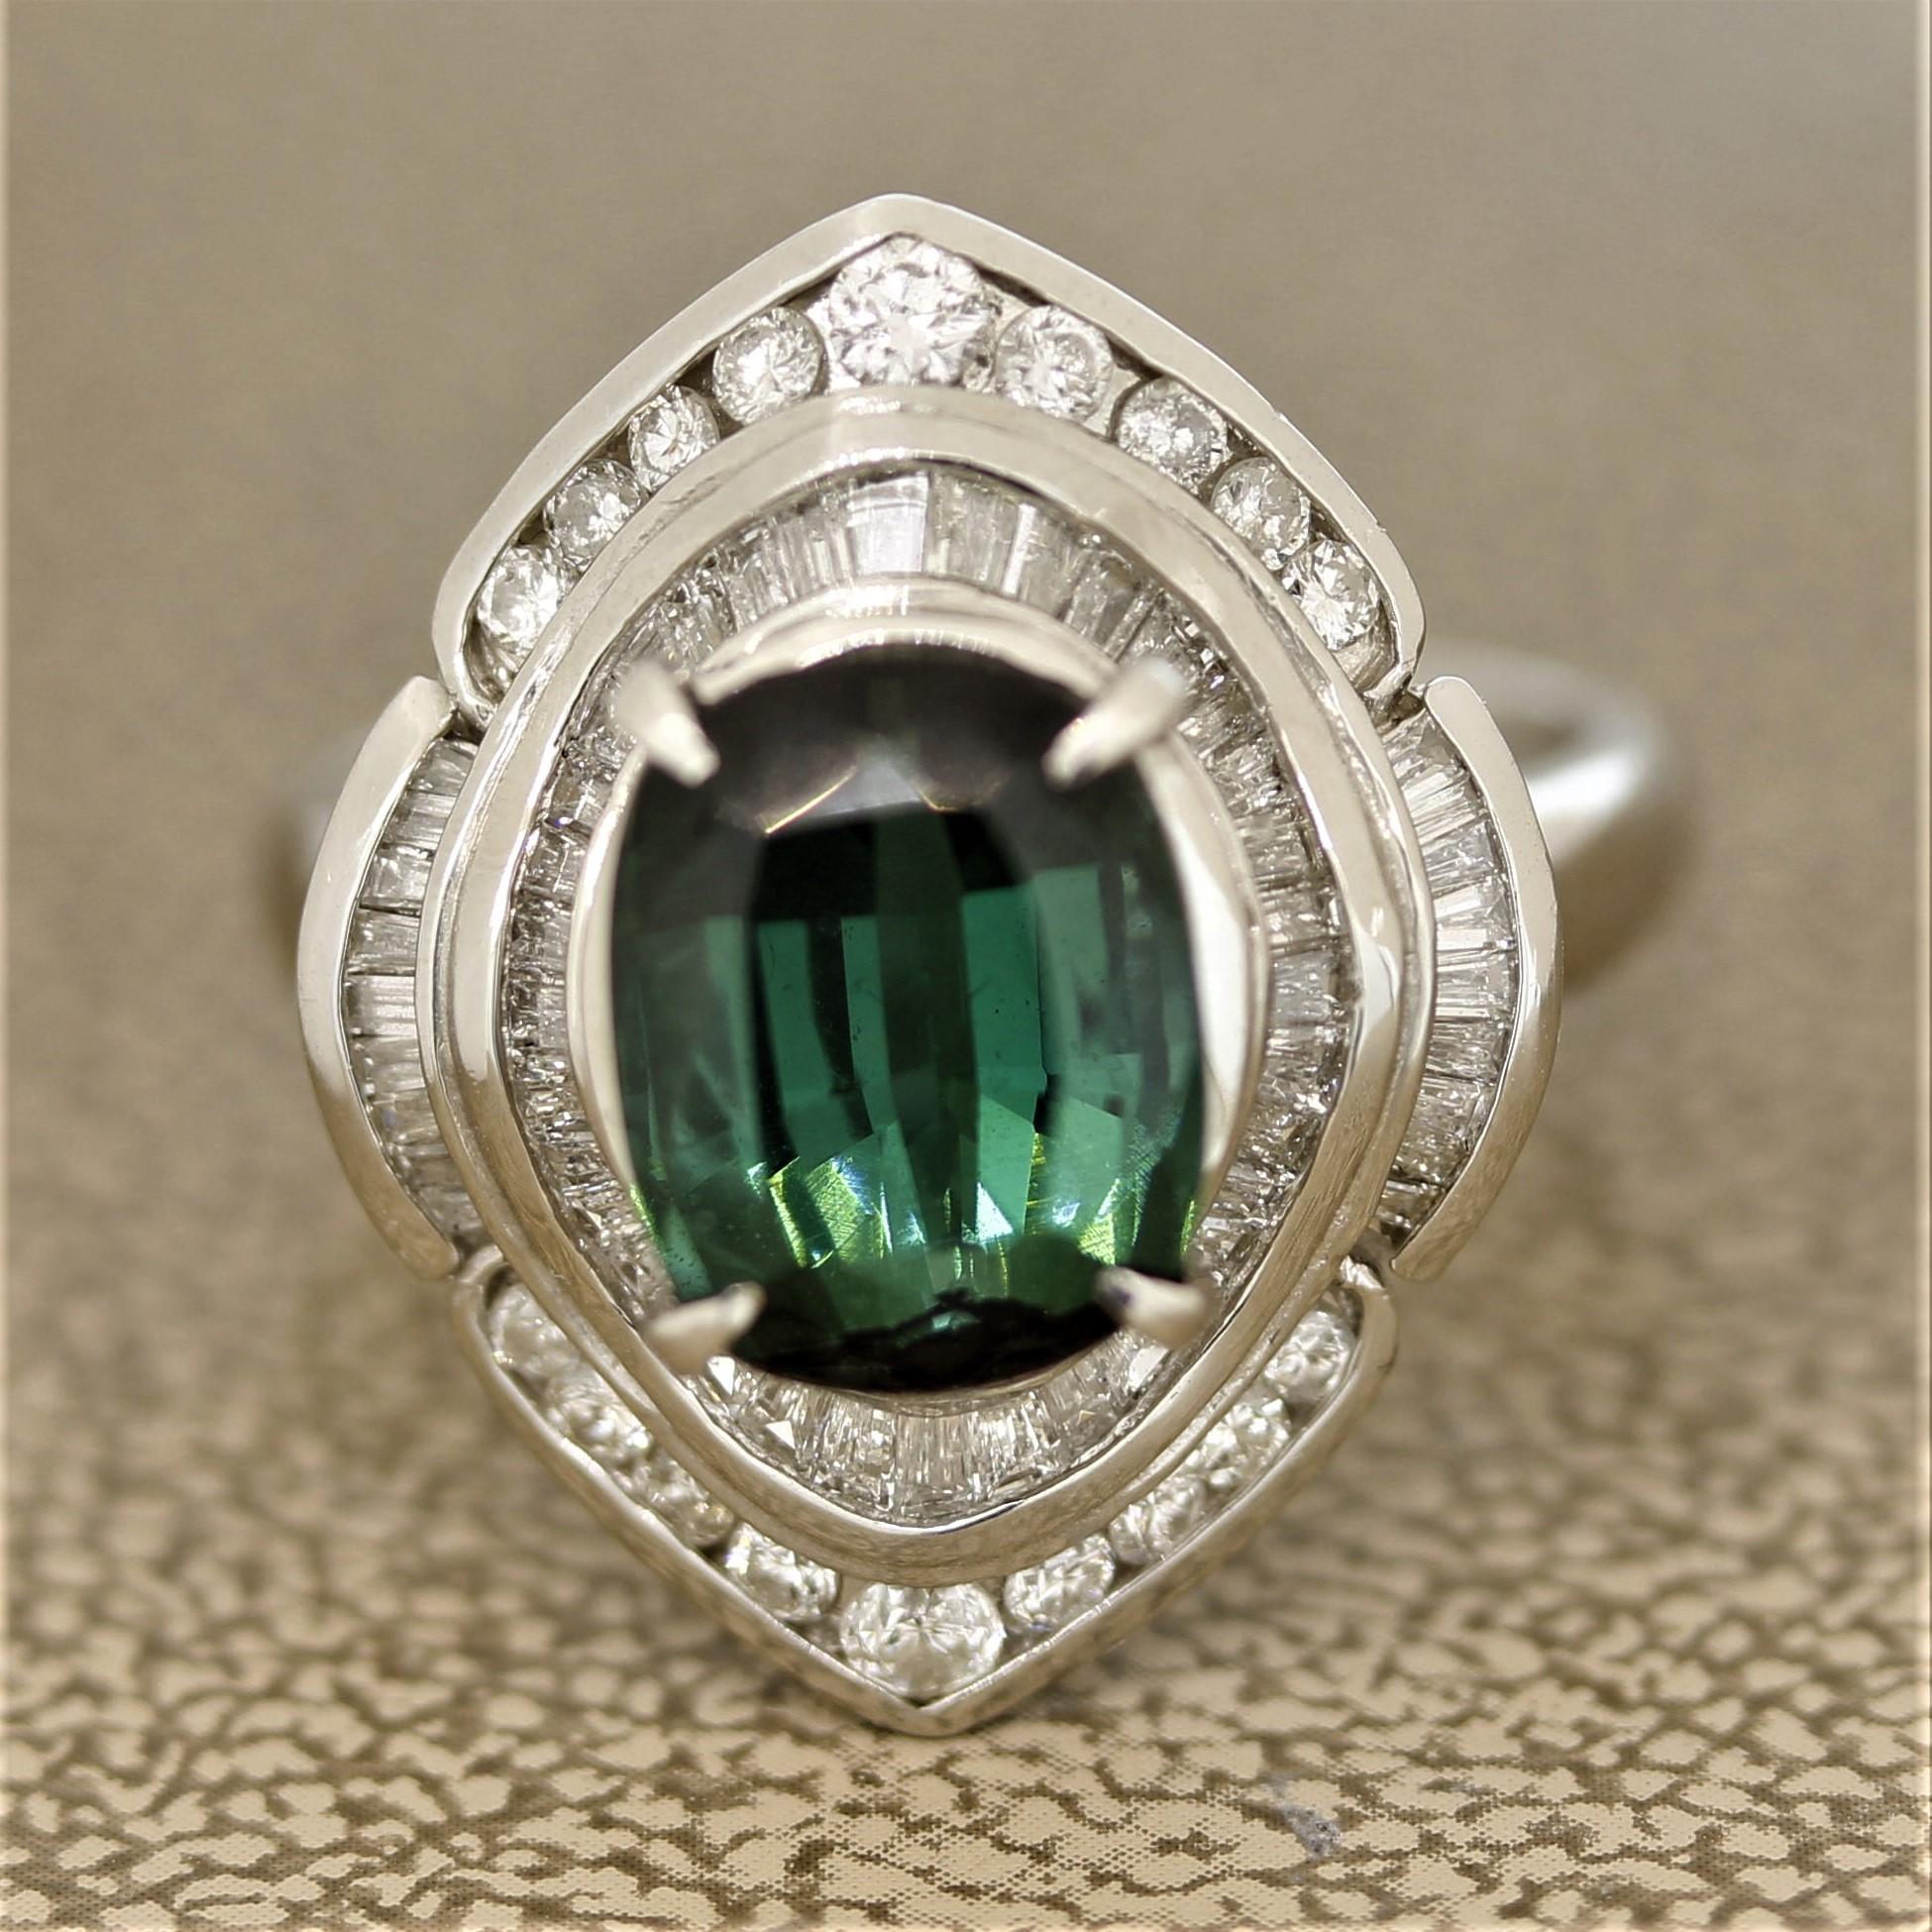 A simple yet elegant tourmaline ring. It features a deeply saturated bluish-green tourmaline in a cushion shape. It weighs 3.47 carats and has a similar color to an indicolite tourmaline but with a green primary color. It is accented by 0.82 carats